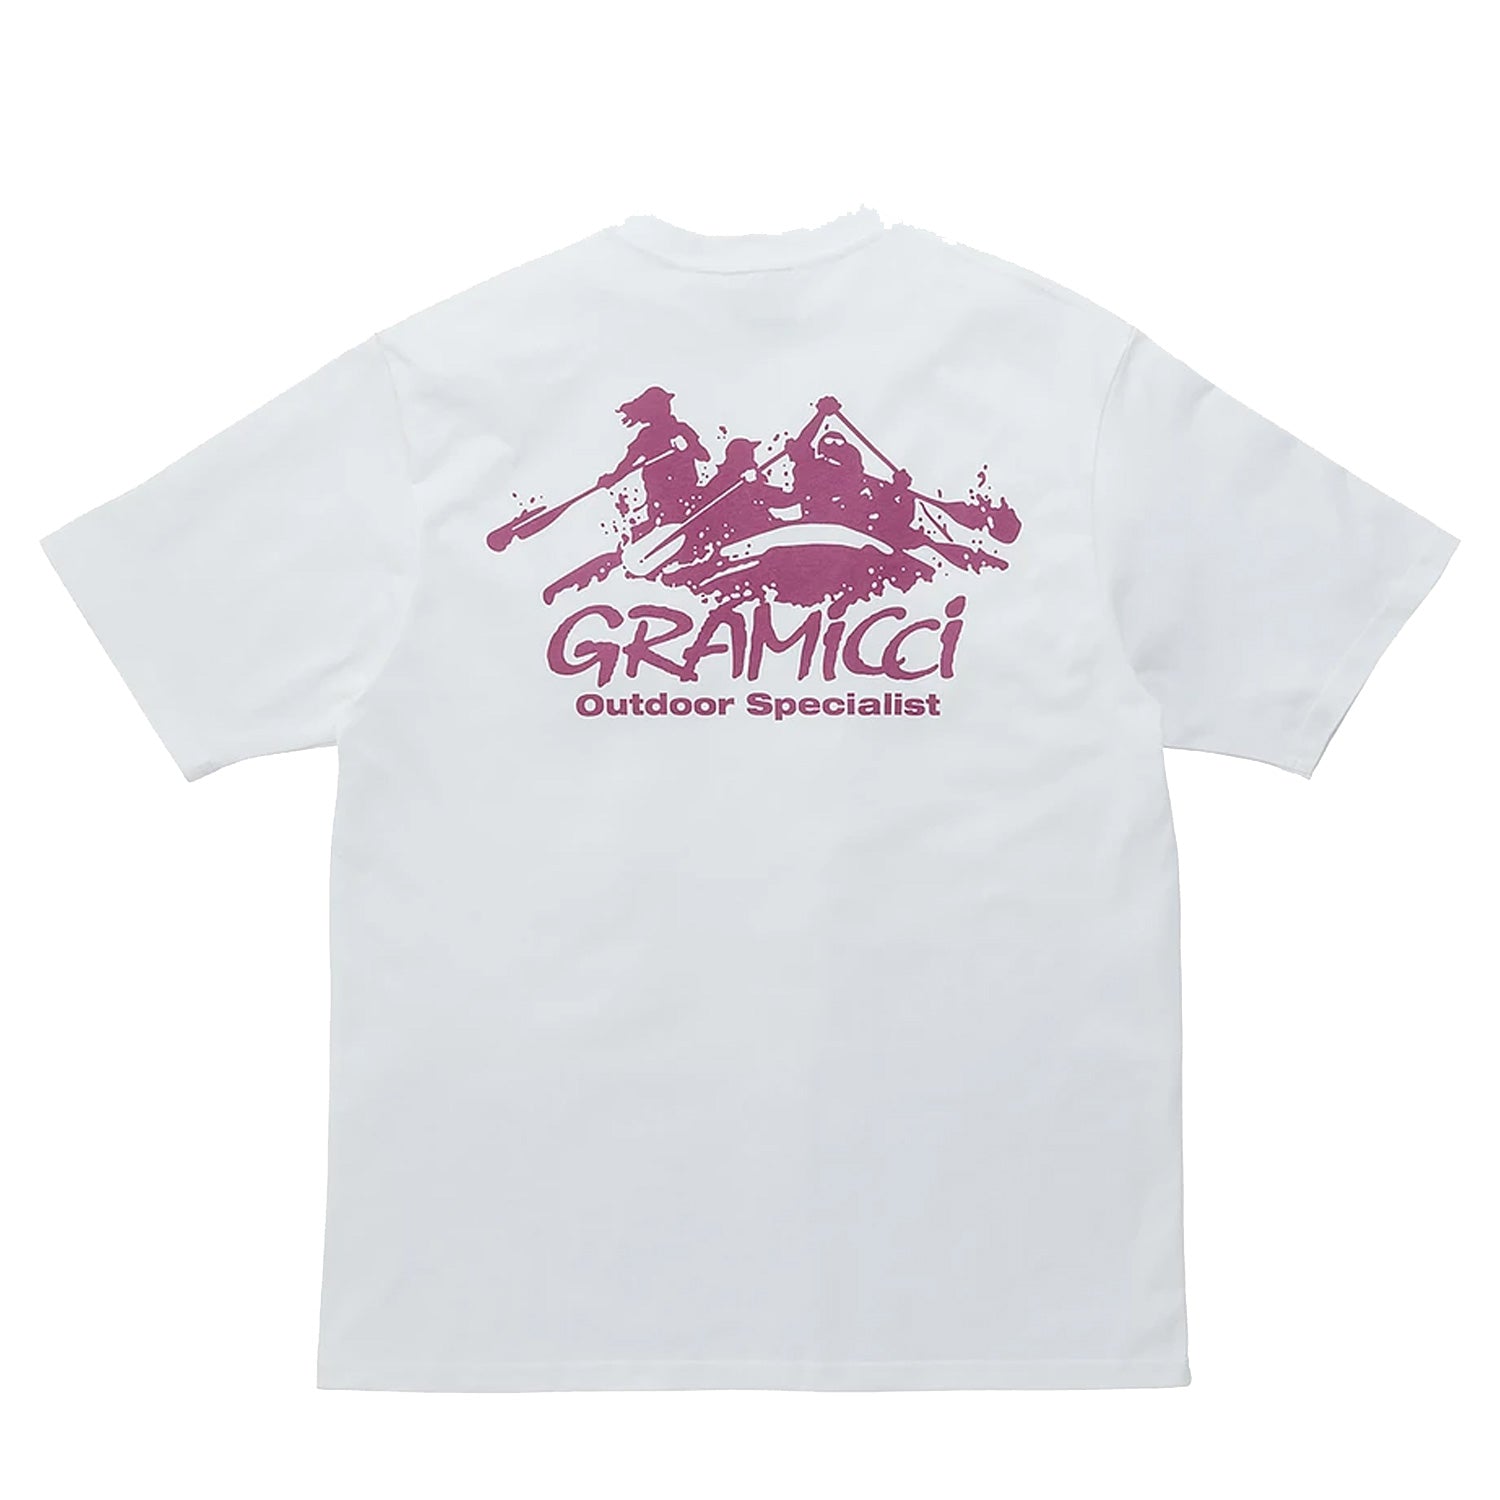 White Gramicci short sleeve t-shirt with printed logos in purple on front and back. Free UK Shipping on orders over £50